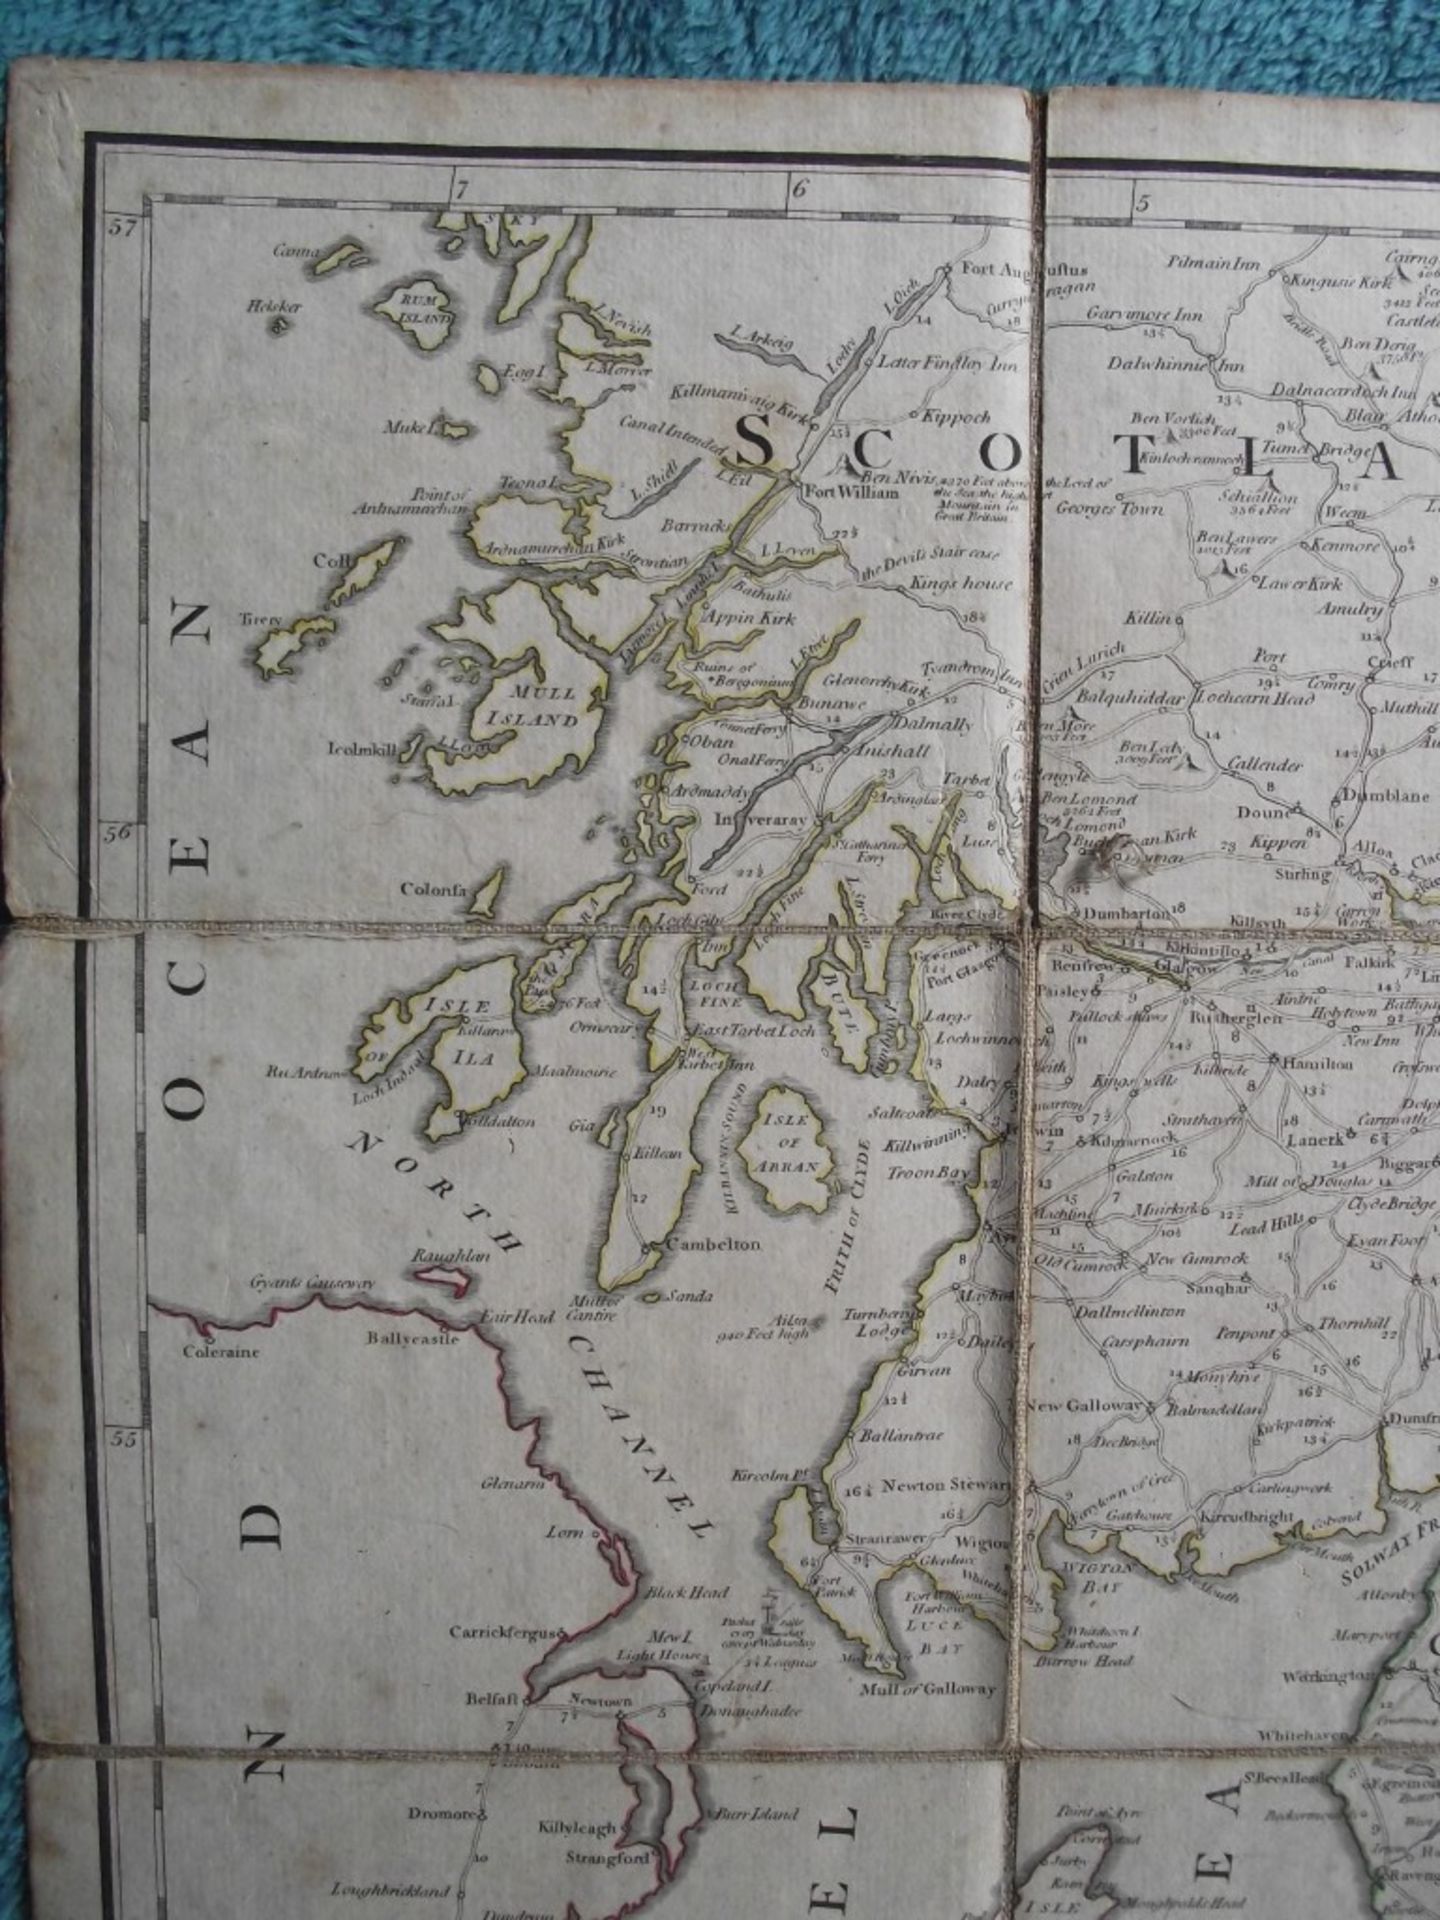 A New Map of The Roads of England and Scotland - Laurie & Whittle - 1794 - With Original Case - Image 8 of 32